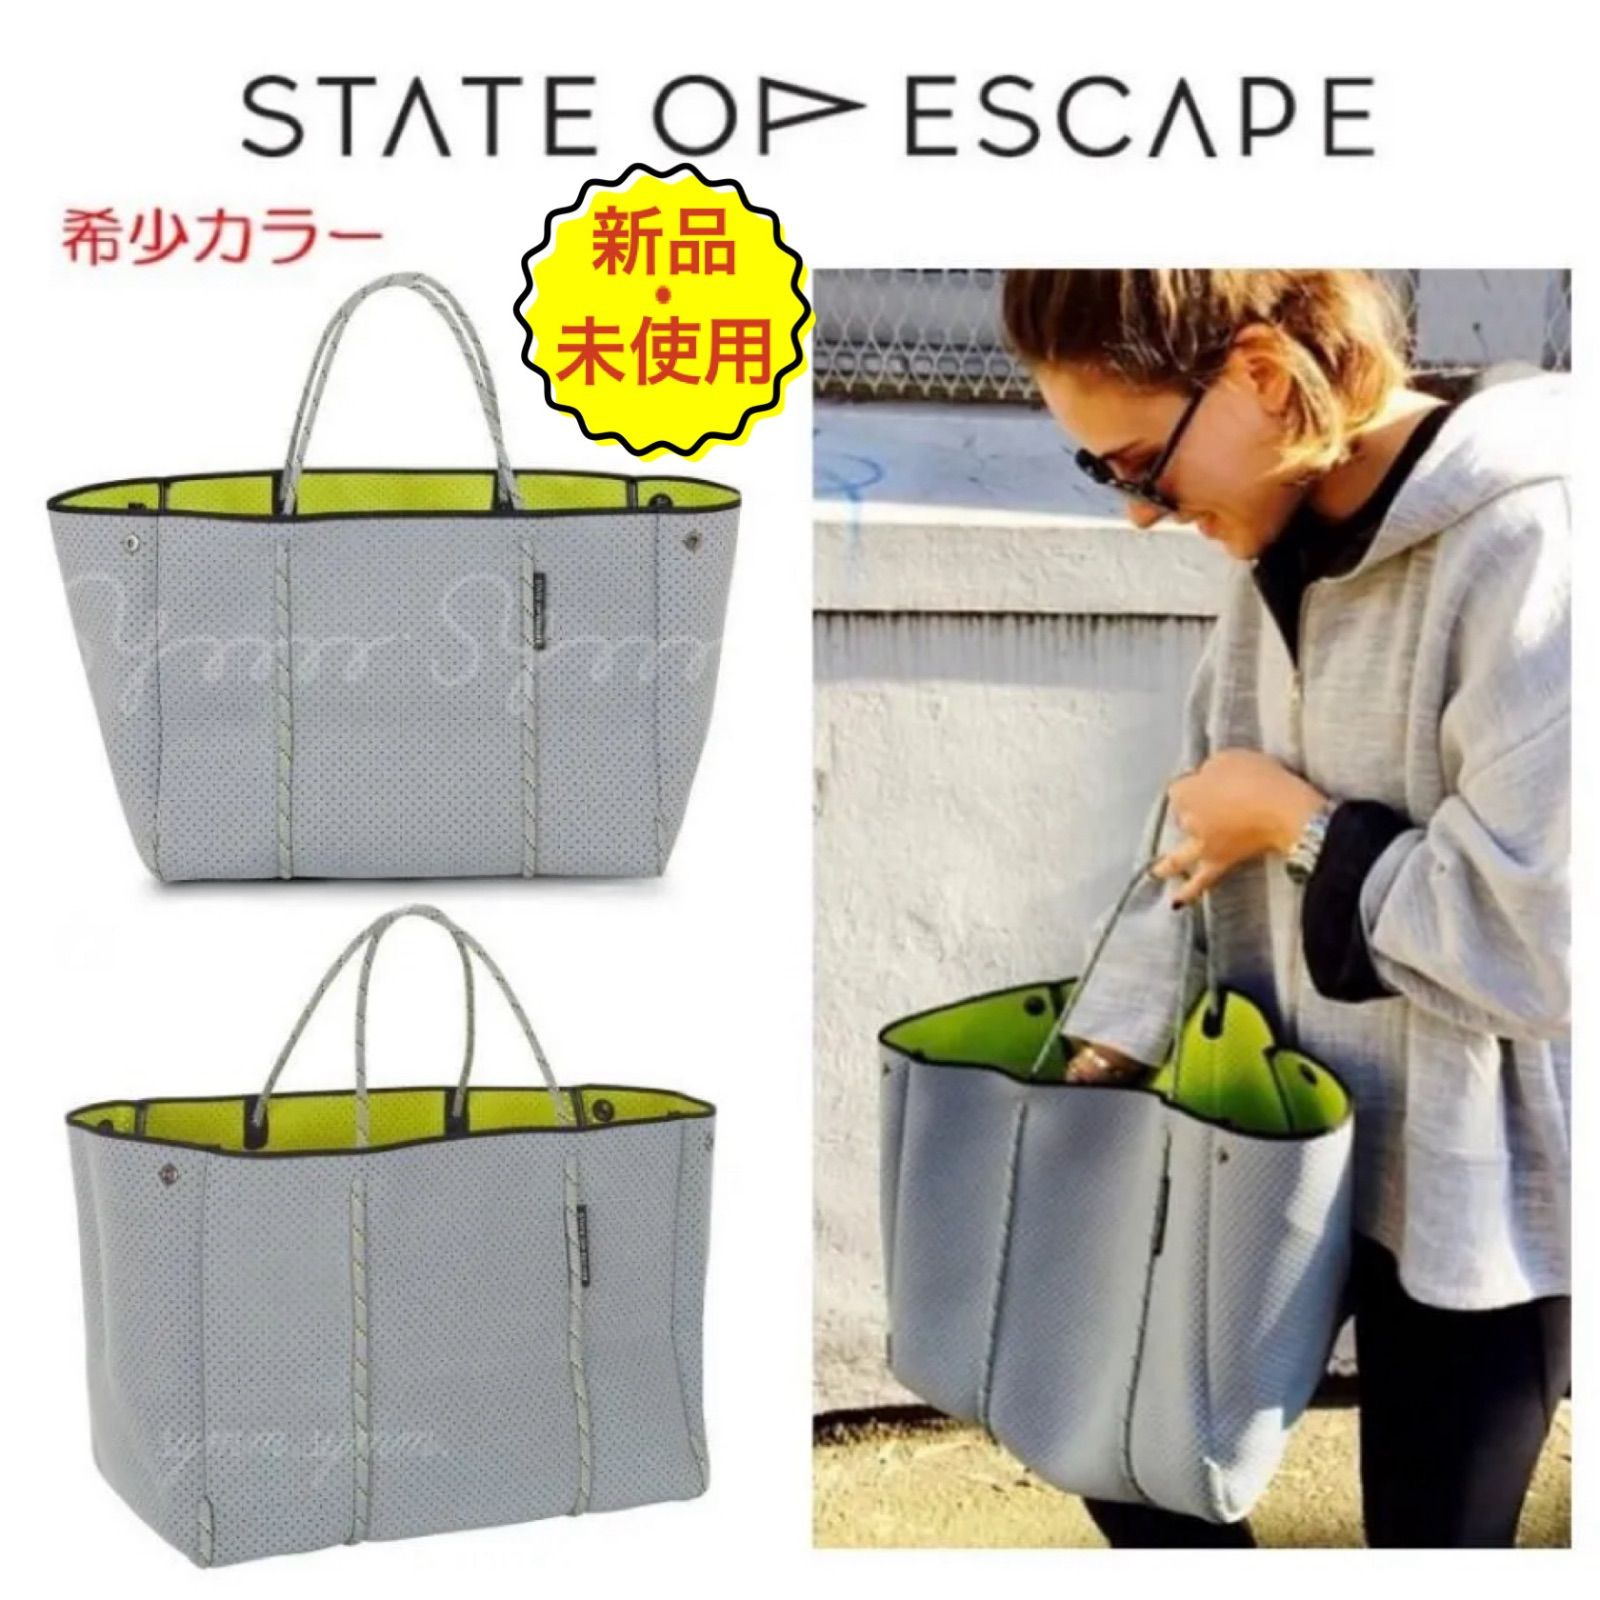 【state of escape 】エスケープバッグ　新品未使用